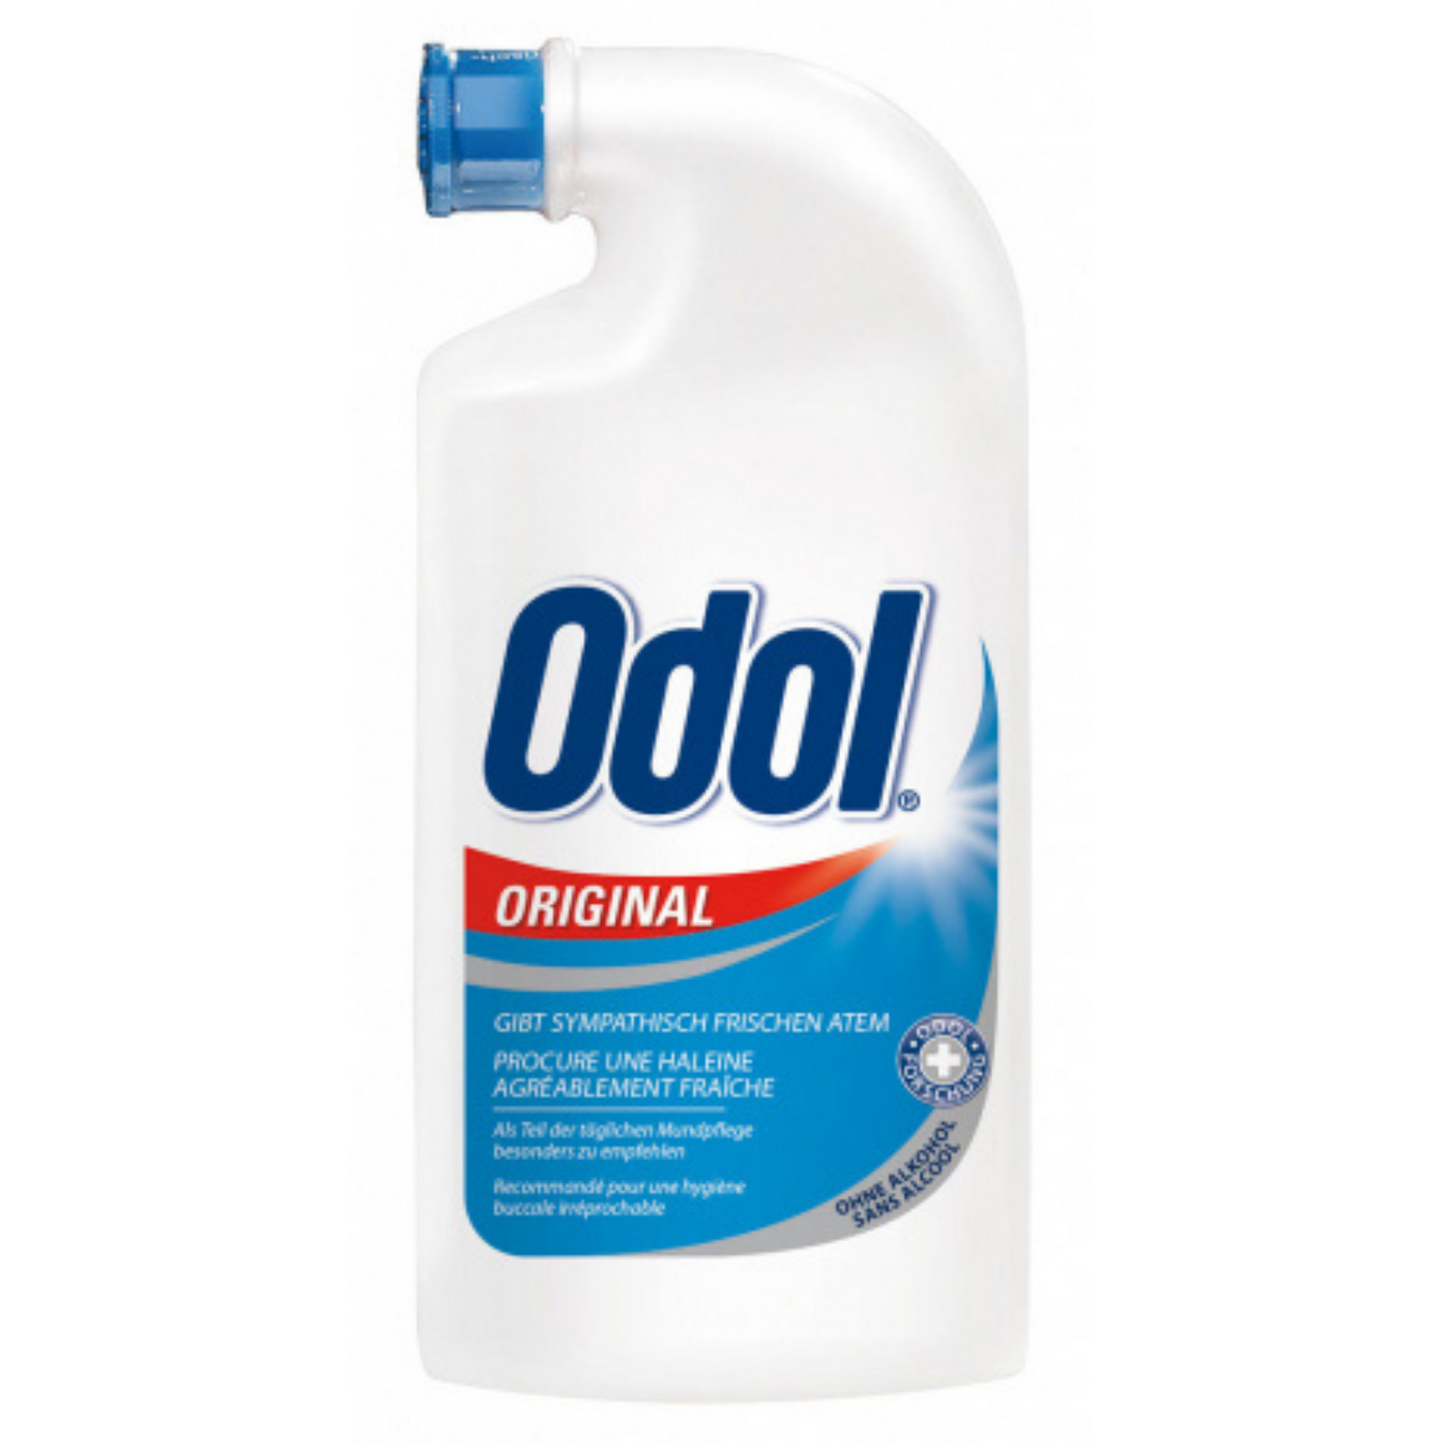 Primary image of Odol Concentrated Mouthwash